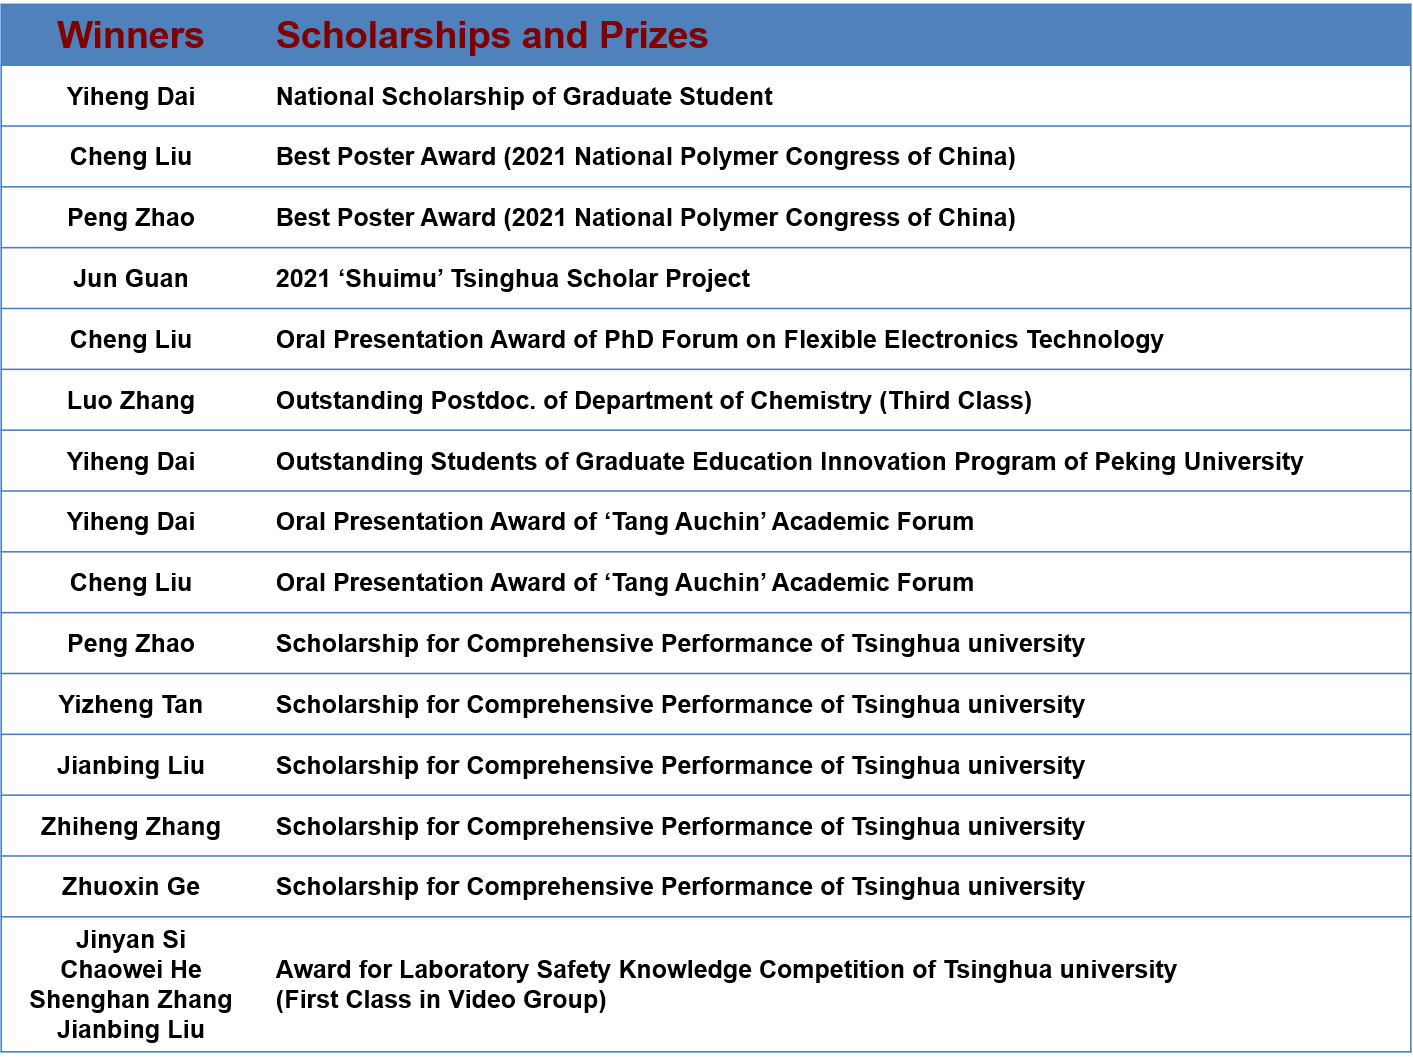 Scholarships and prizes of Xu’s group in 2021